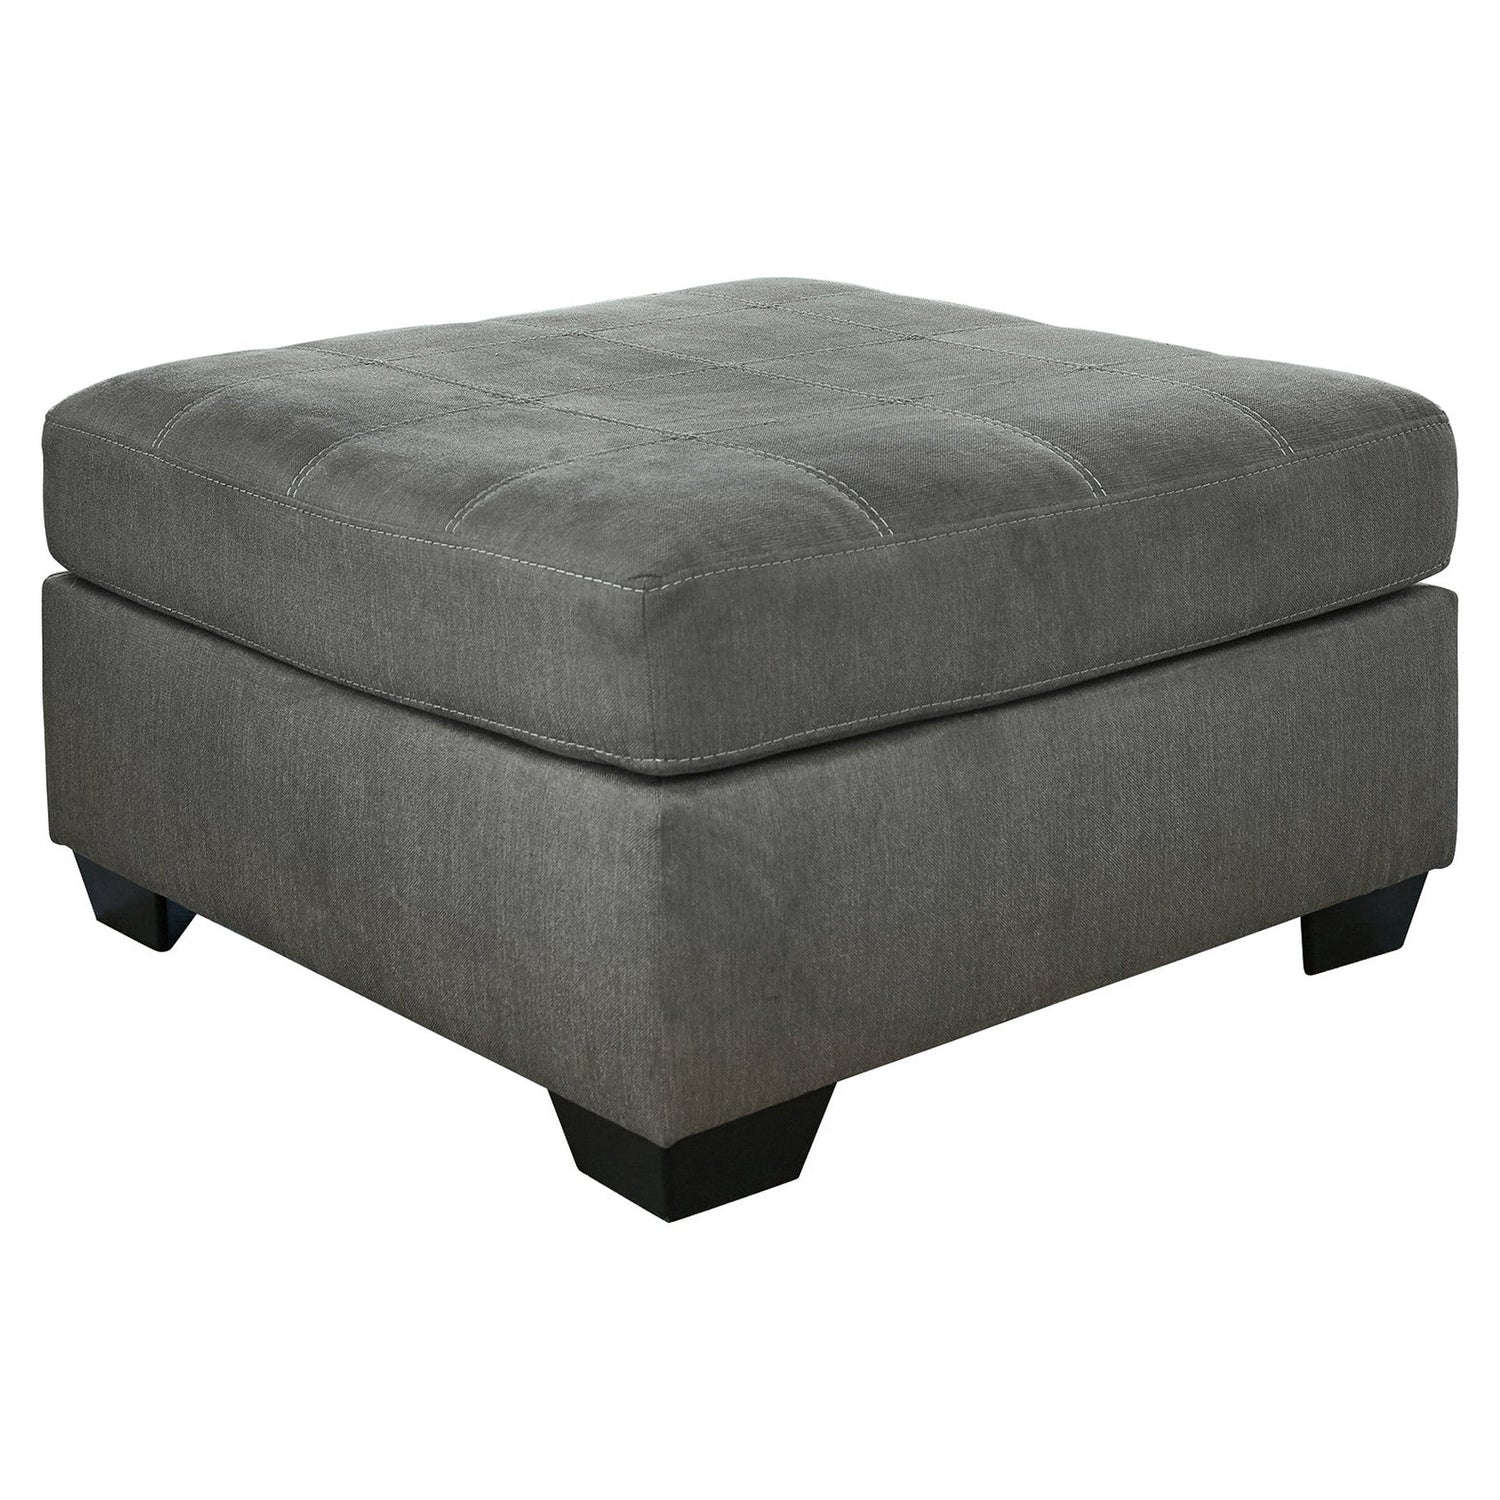 Pitkin Oversized Accent Ottoman Ash-3492708